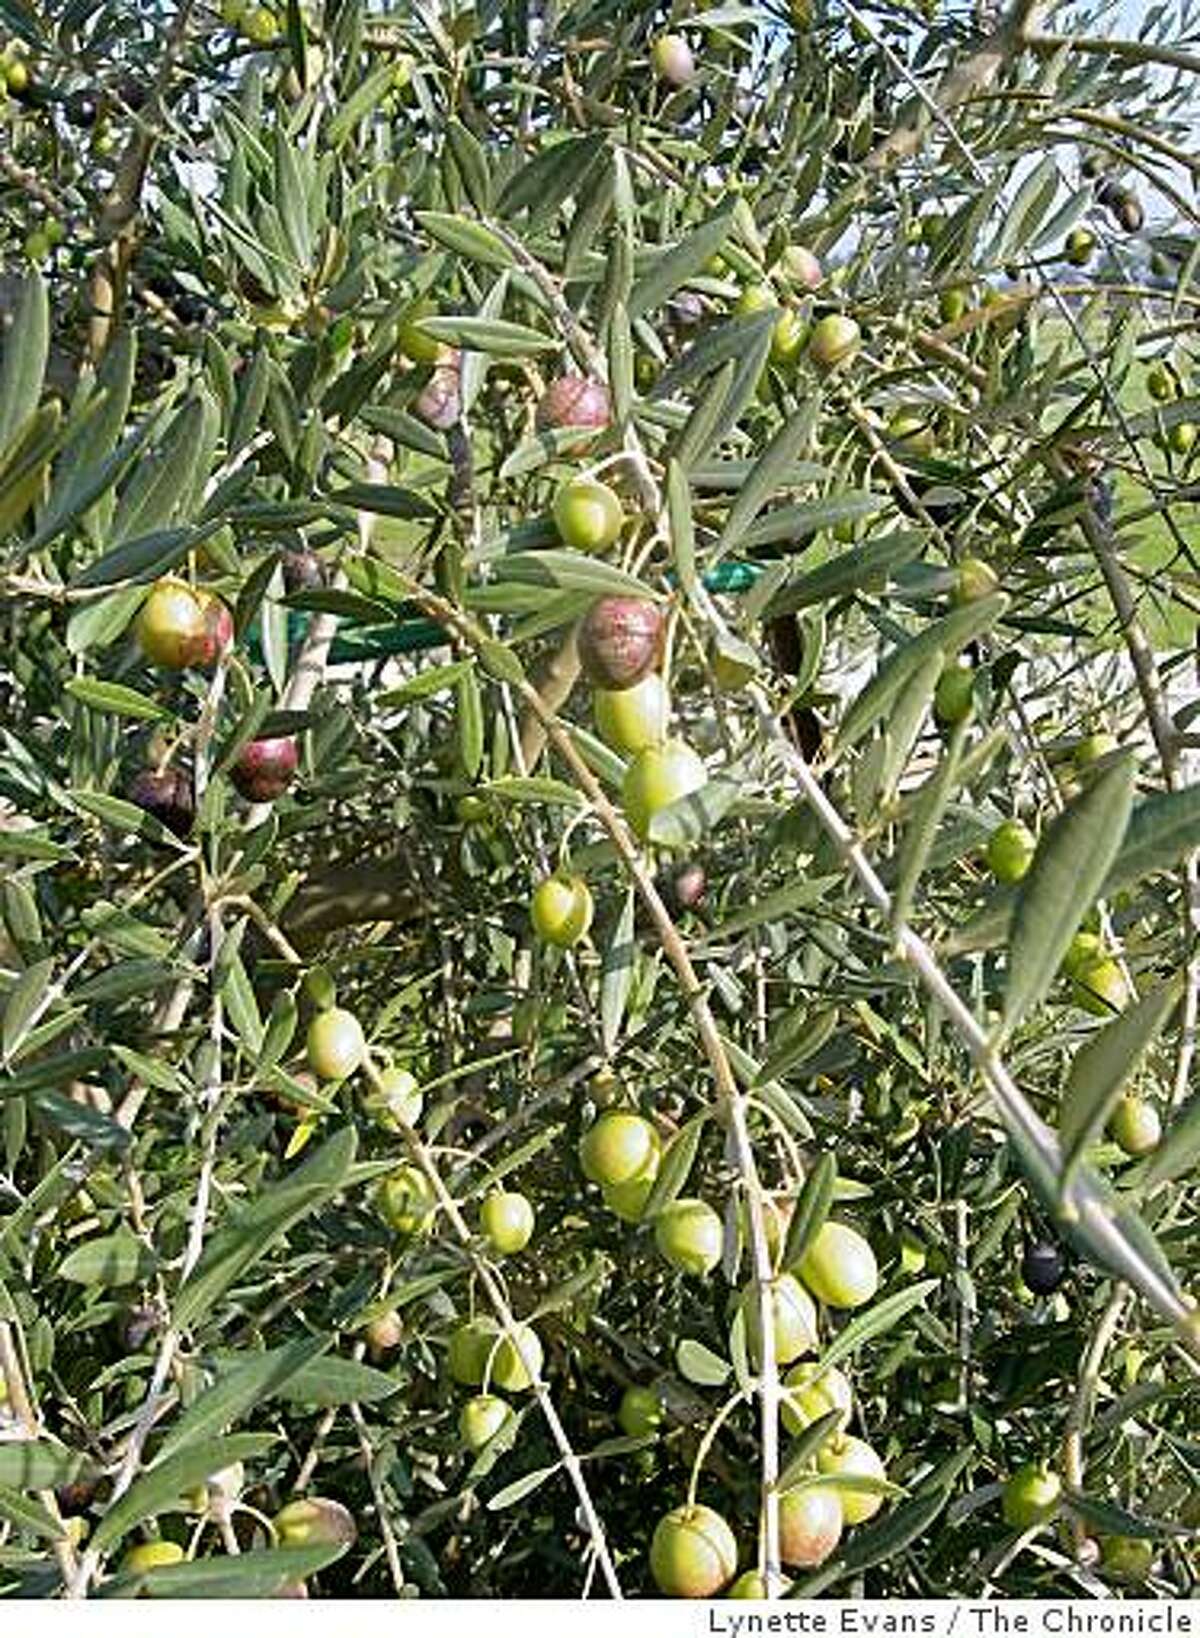 Green Spanish olives ready for picking